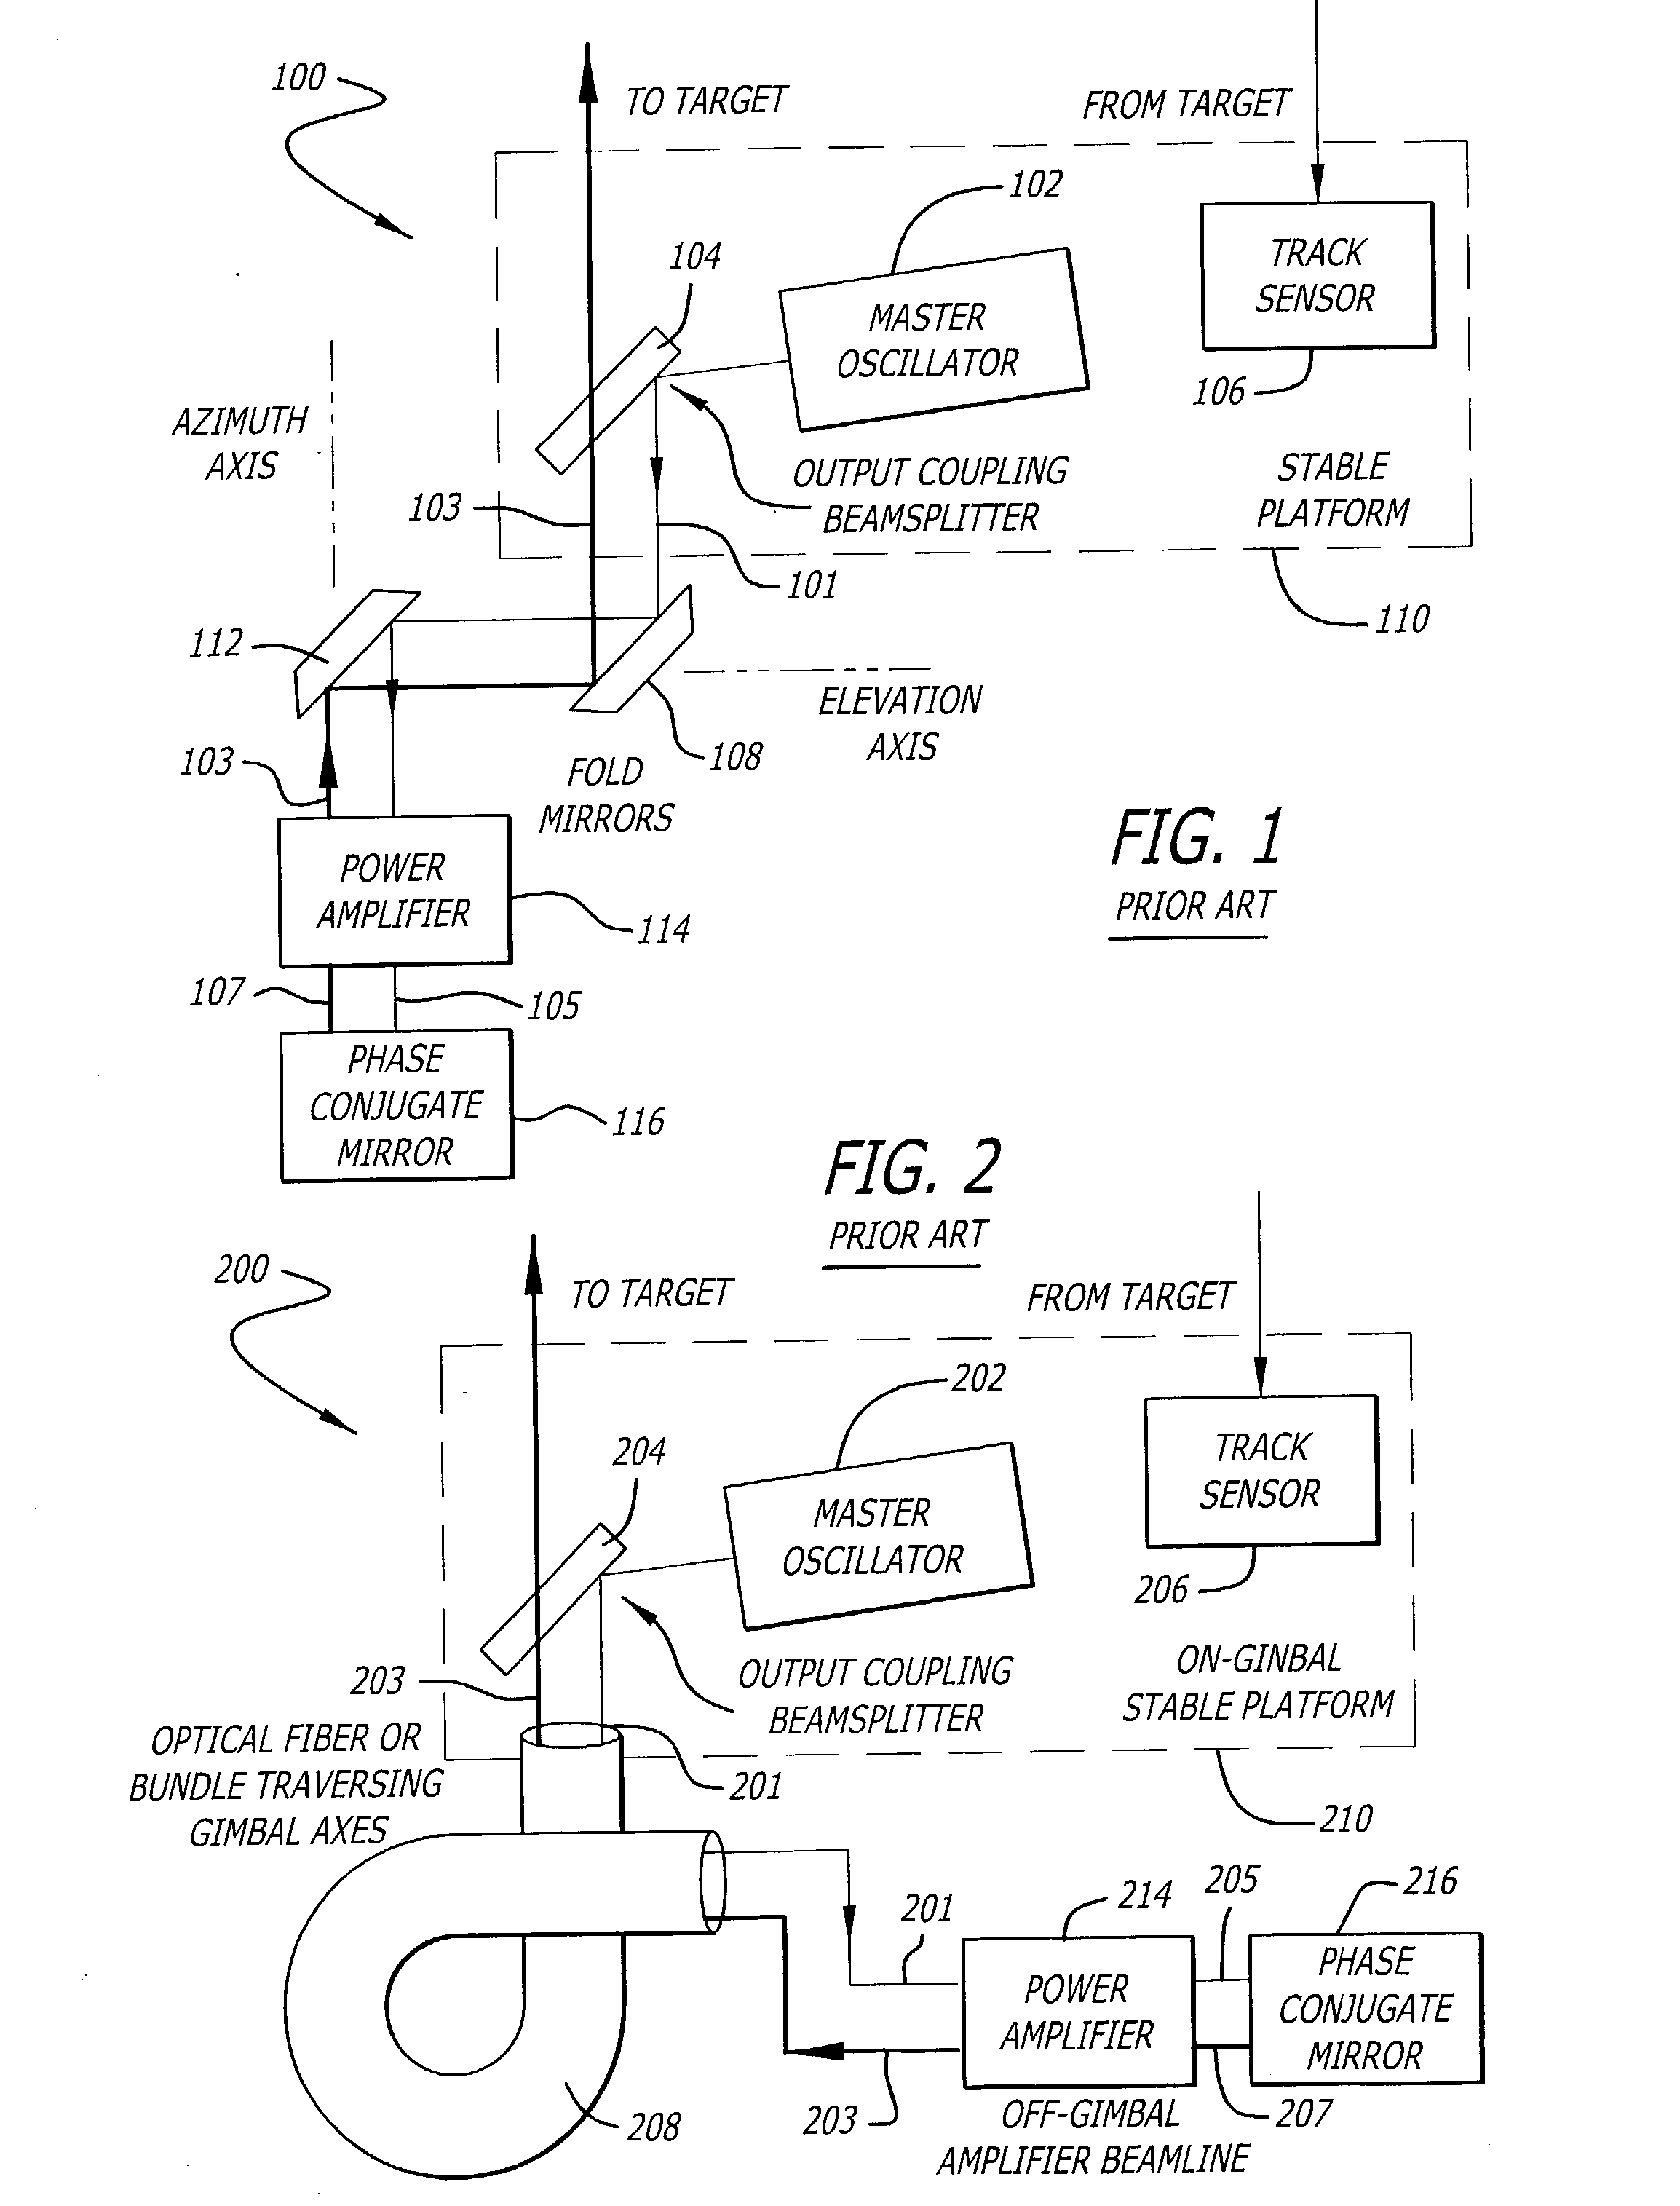 Phase conjugate relay mirror apparatus for high energy laser system and method